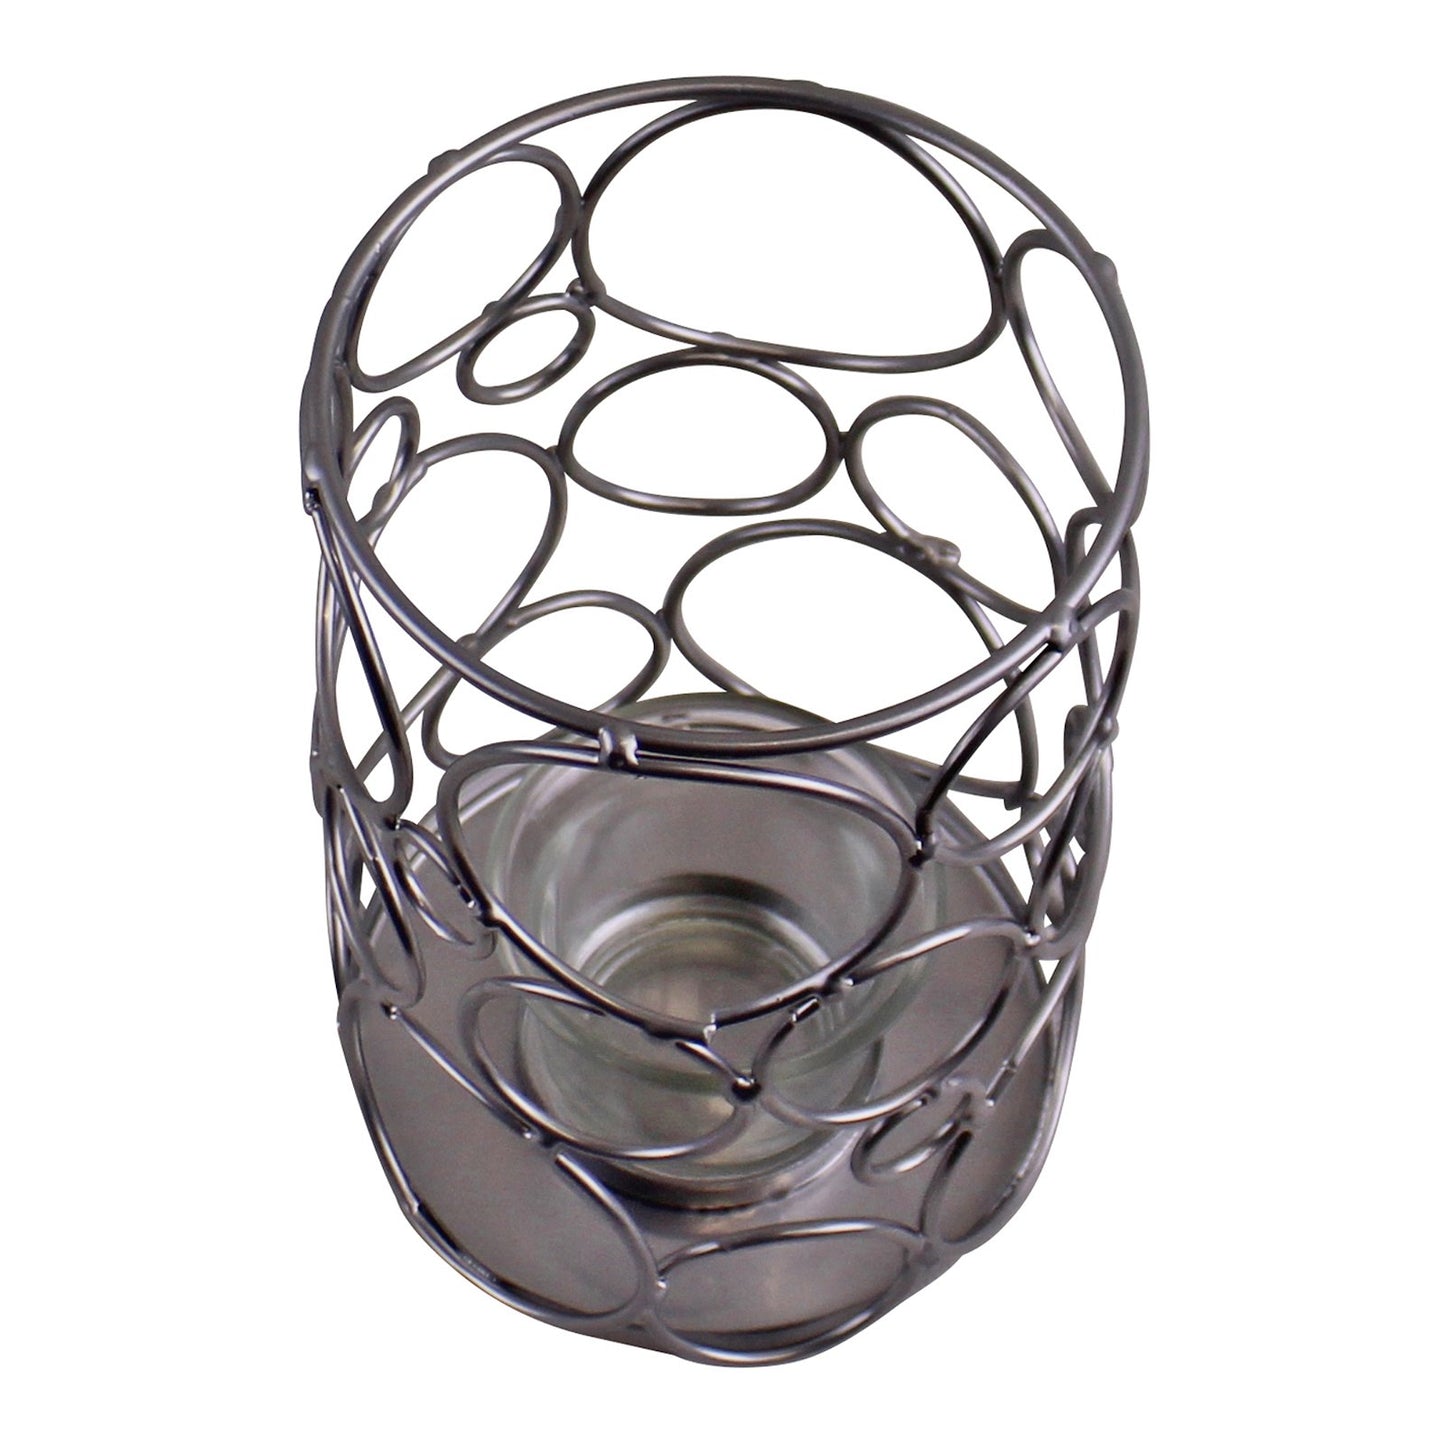 Small Silver Metal Abstract Design Candle Holder - Kaftan direct